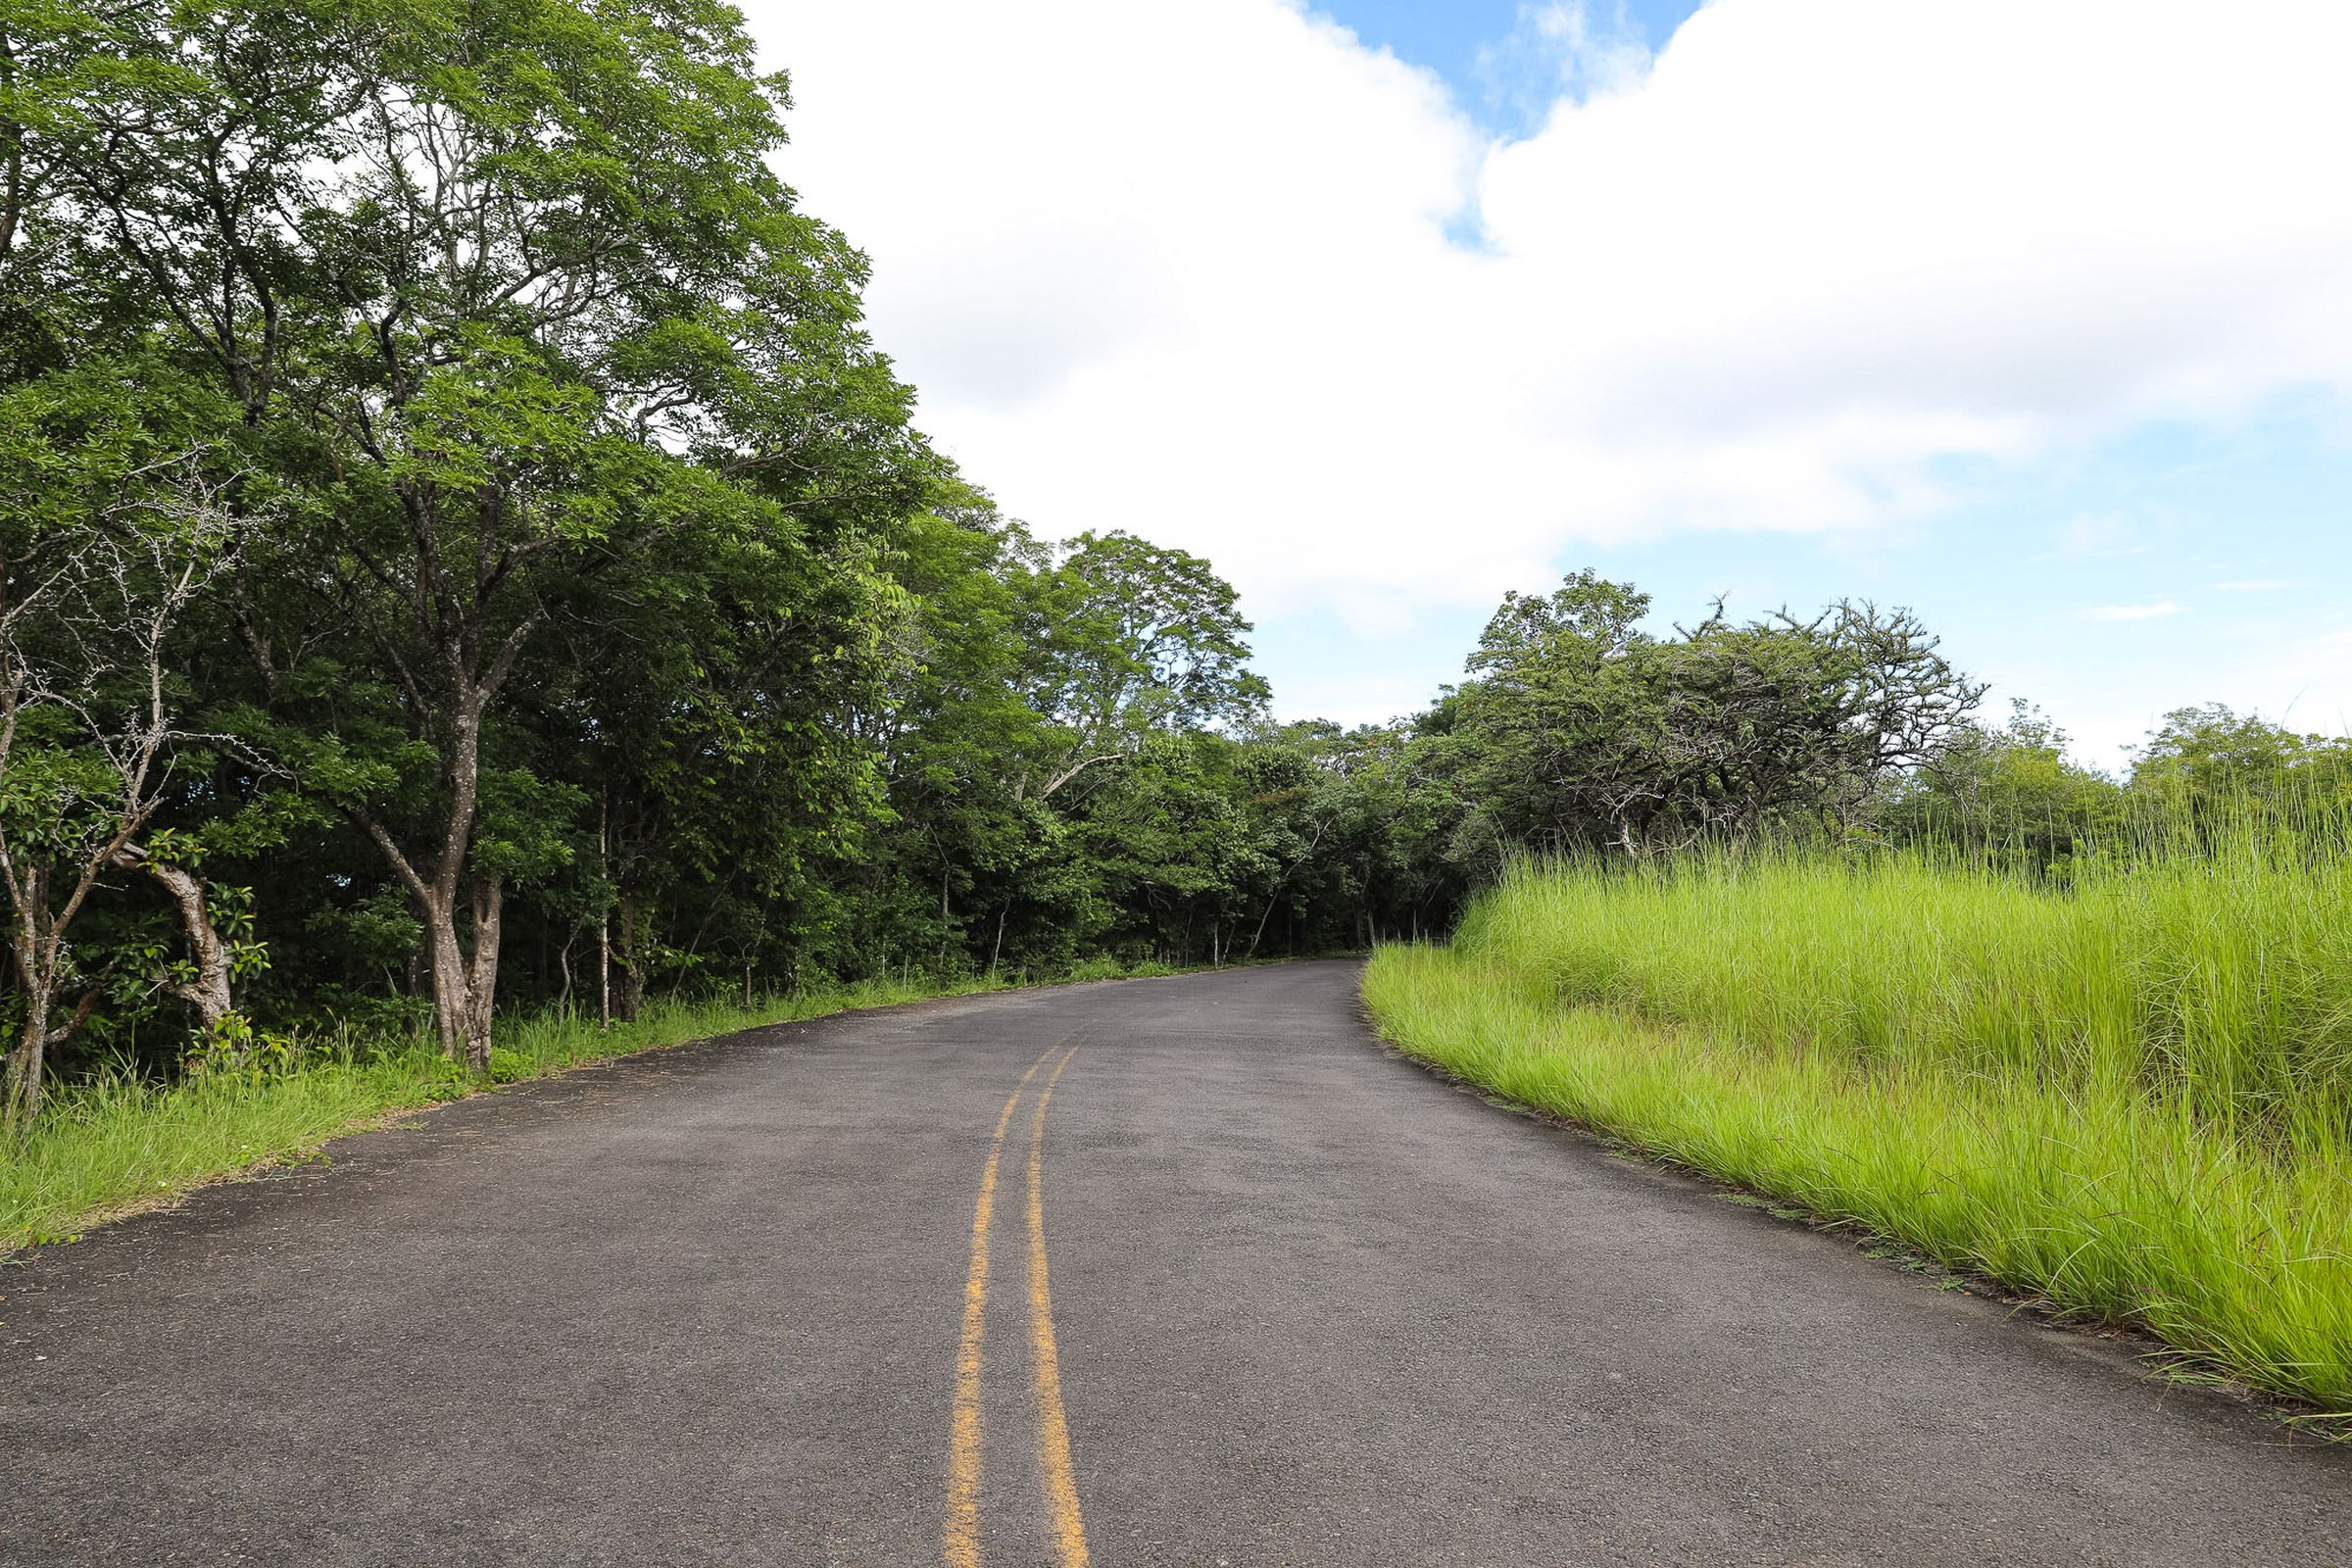 A paved two-lane road with tree canopy on the left side and tall grass on the right side.